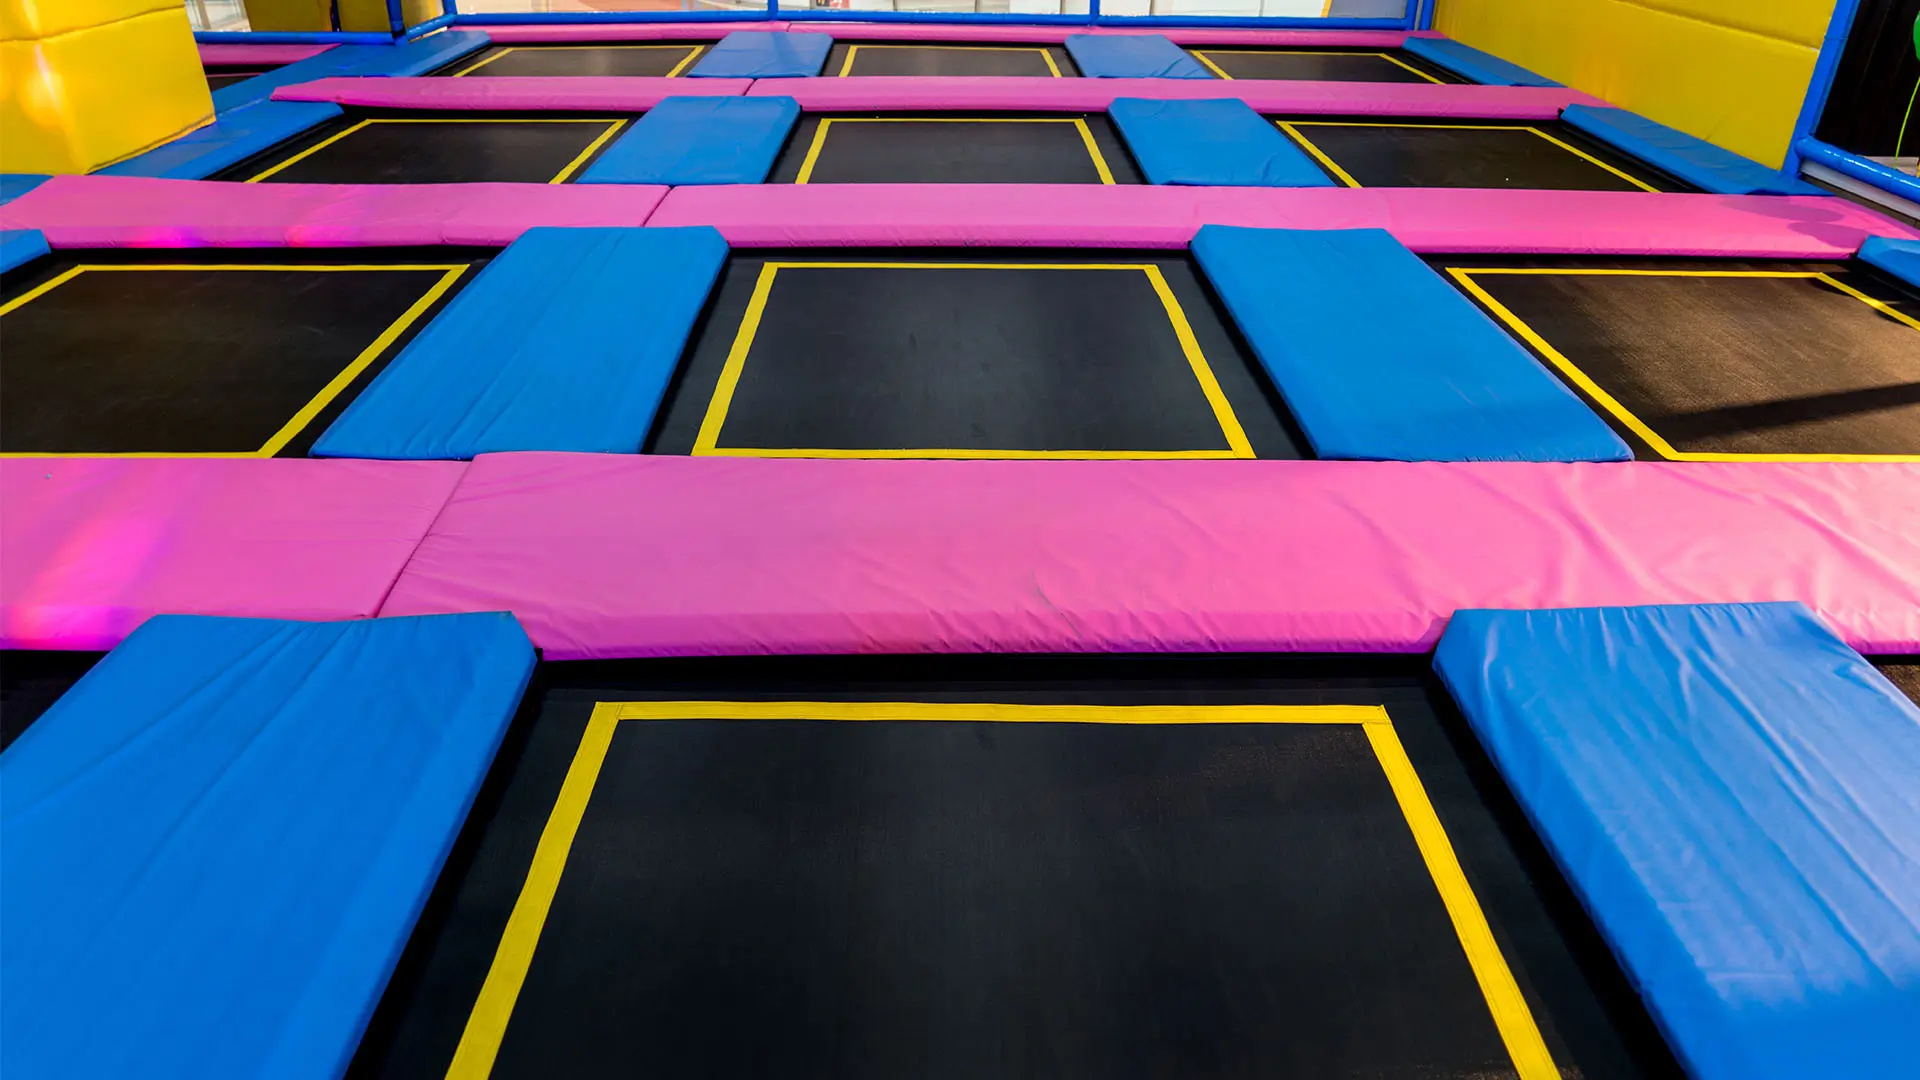 Trampolining: A public trampoline park, A gymnastics and acrobatics facility for active recreational sports. 1920x1080 Full HD Wallpaper.